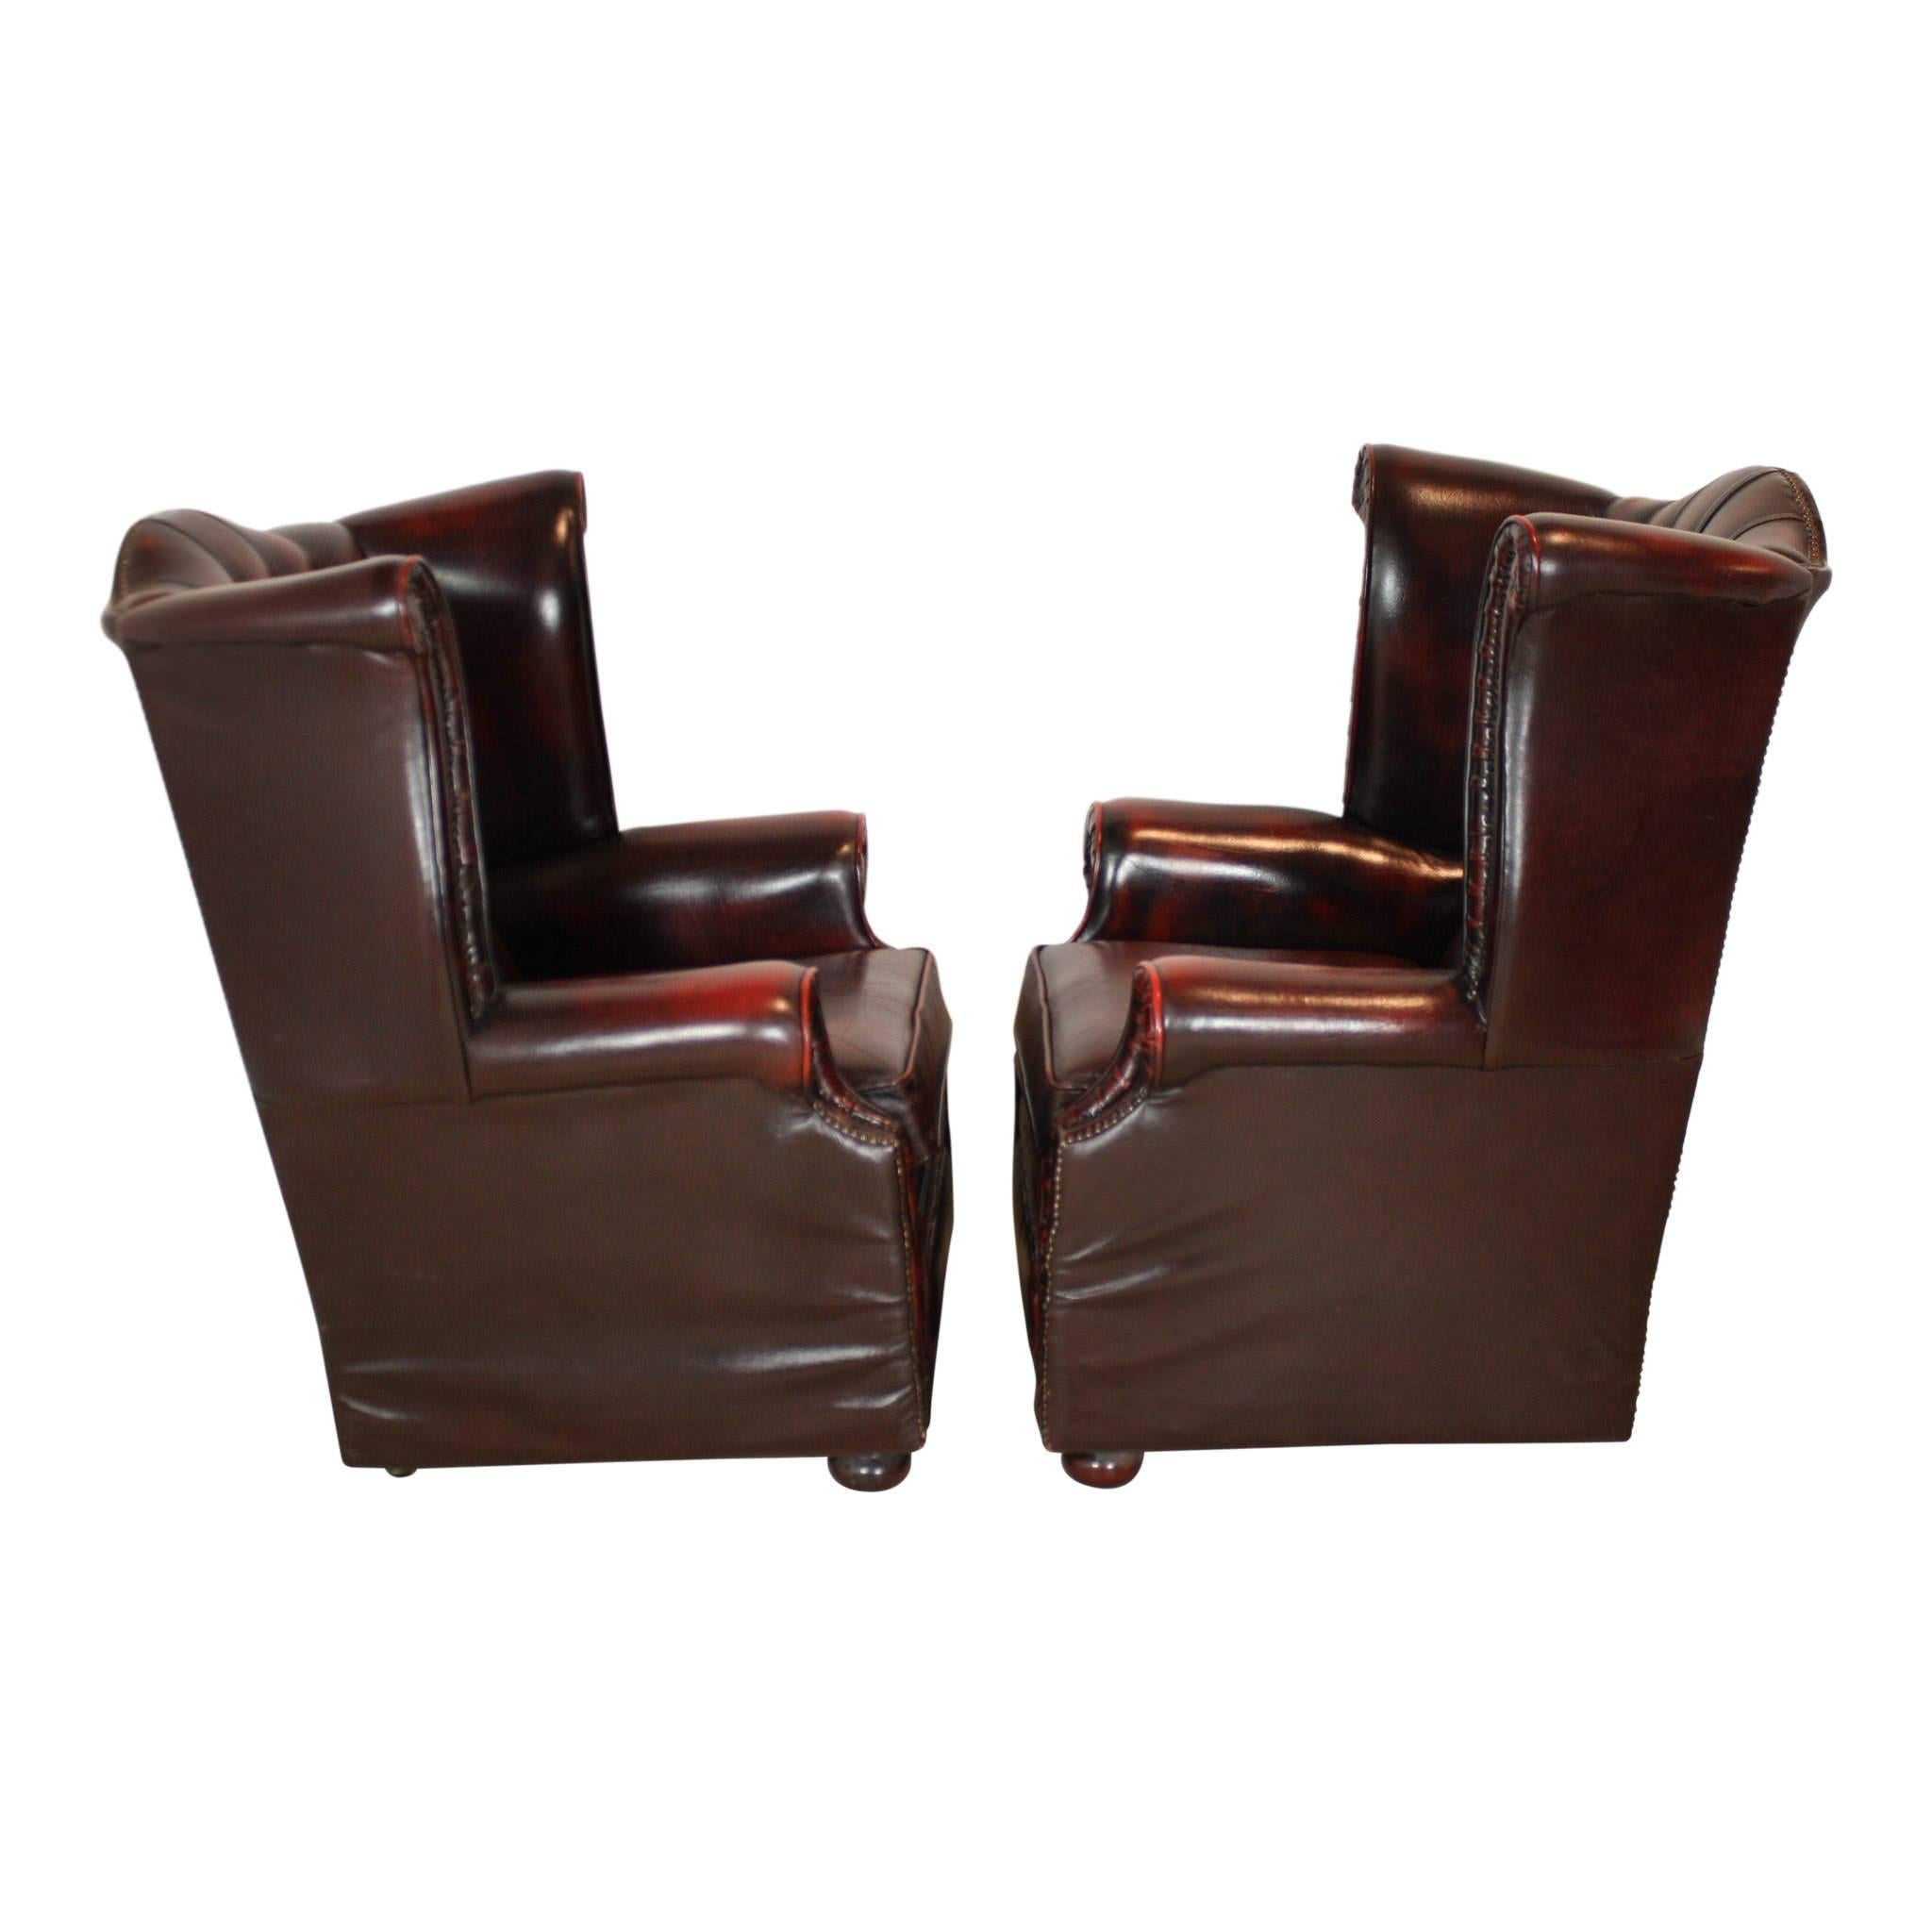 Upholstered in dark reddish-brown leather, this oxblood set of Chesterfield chairs is both handsome and distinguished. The leather is secured with silver studding along the front, back, top, and wing facings. The chairs backrests are tufted. Bun